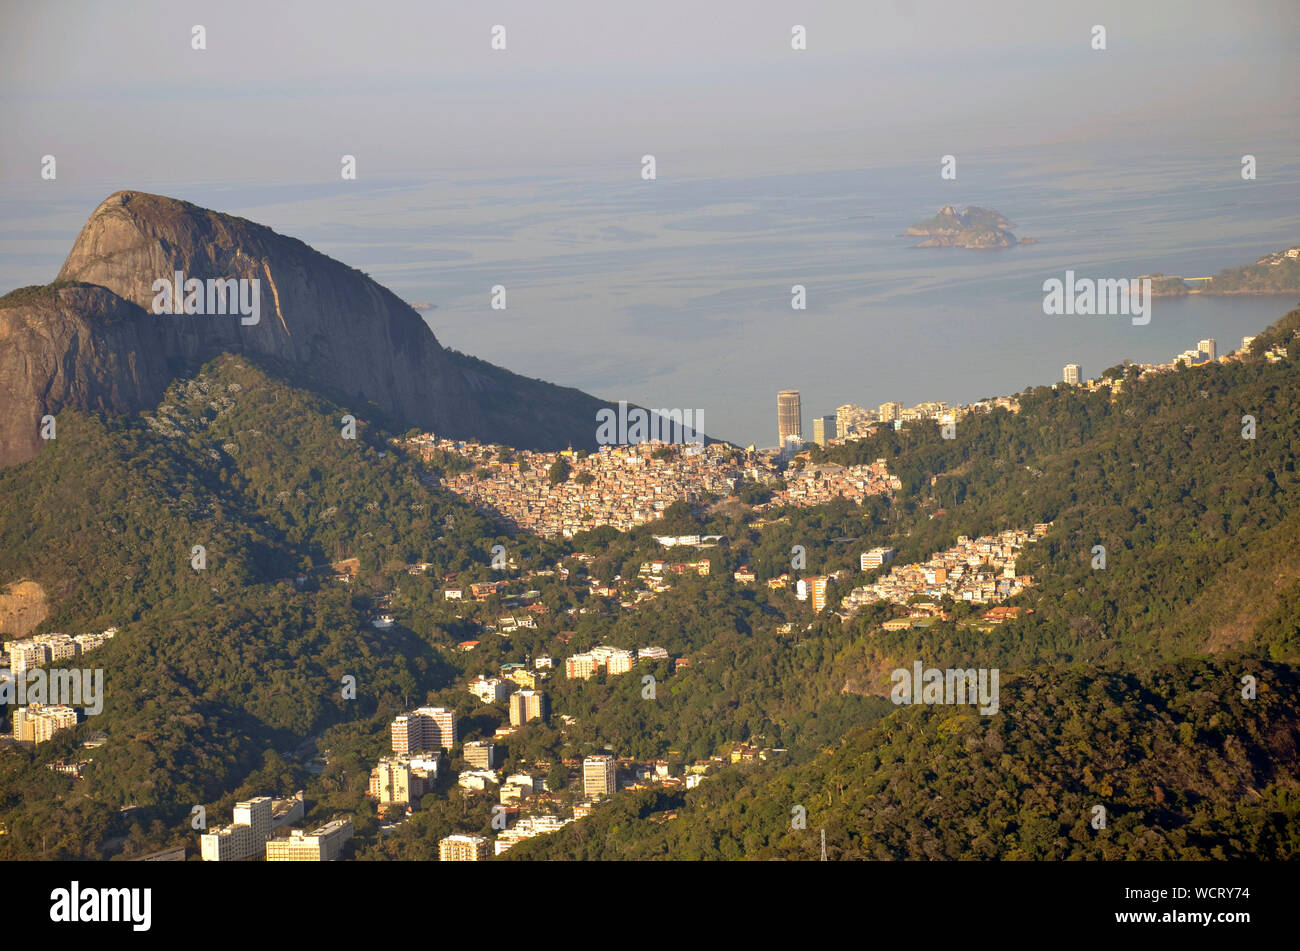 Scenic View Of Houses By Mountain At Morro Dois Irmaos Against Sea Stock Photo